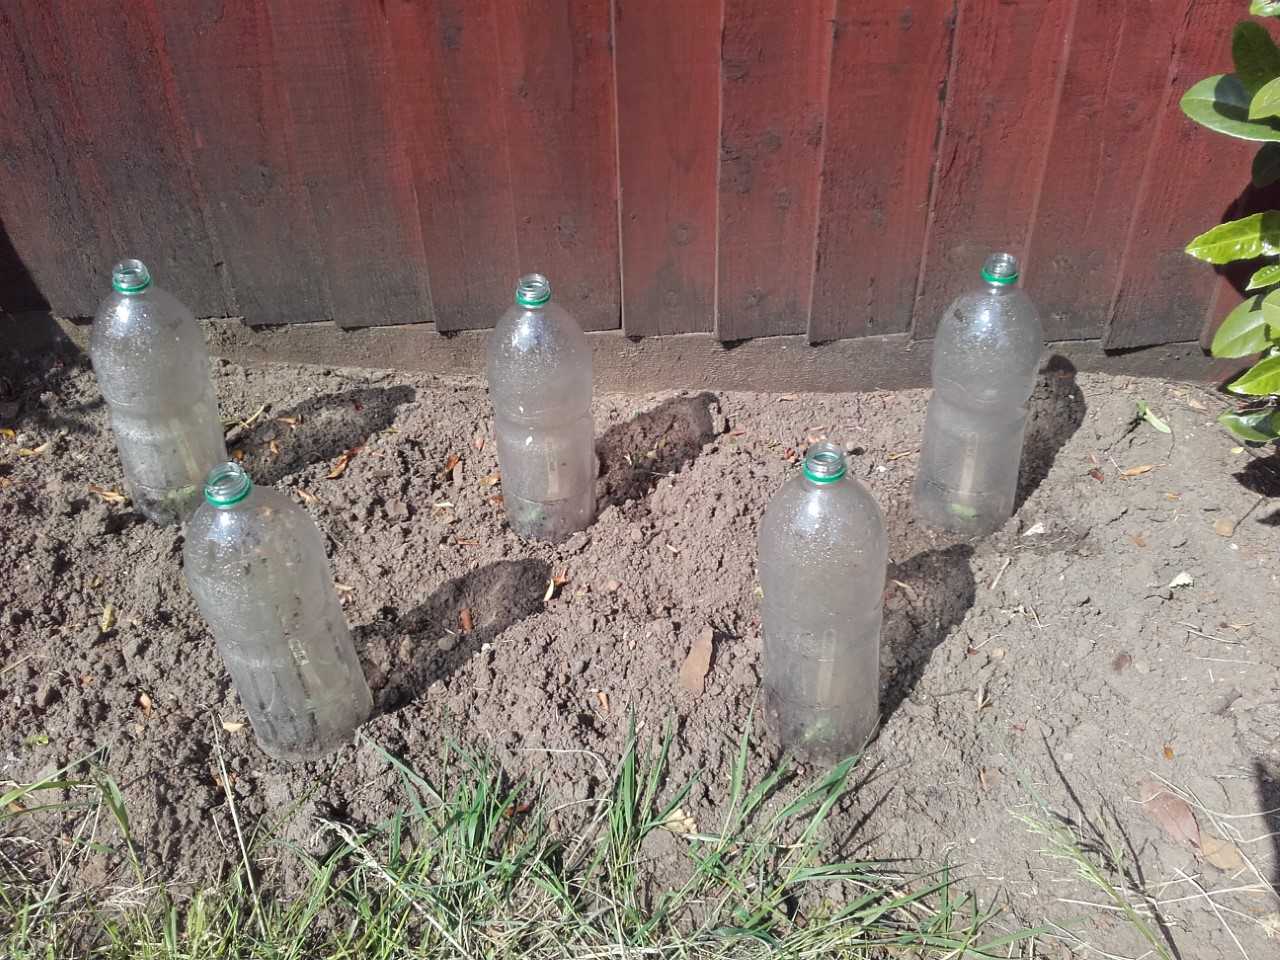 Nikki The weather has been perfect, so I planted them straight into the outdoor soil. The bottles are just to stop the birds and squirrels eating them.